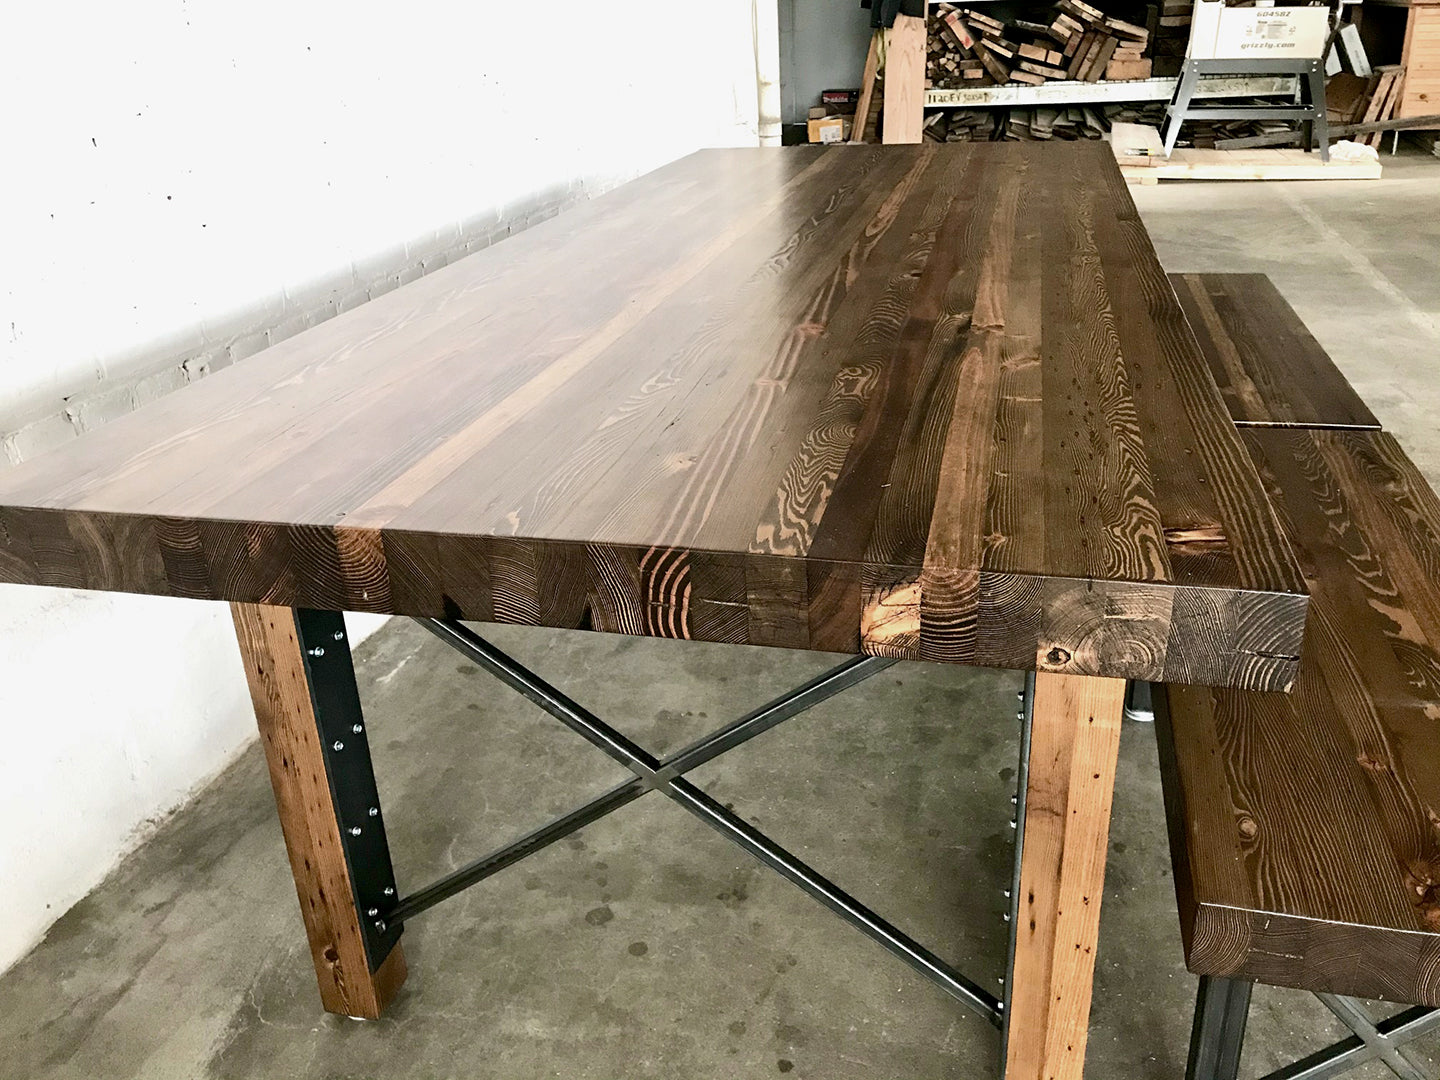 Grand Urban Farmhouse Dining Table and Bench Set - Walnut Stain Finish